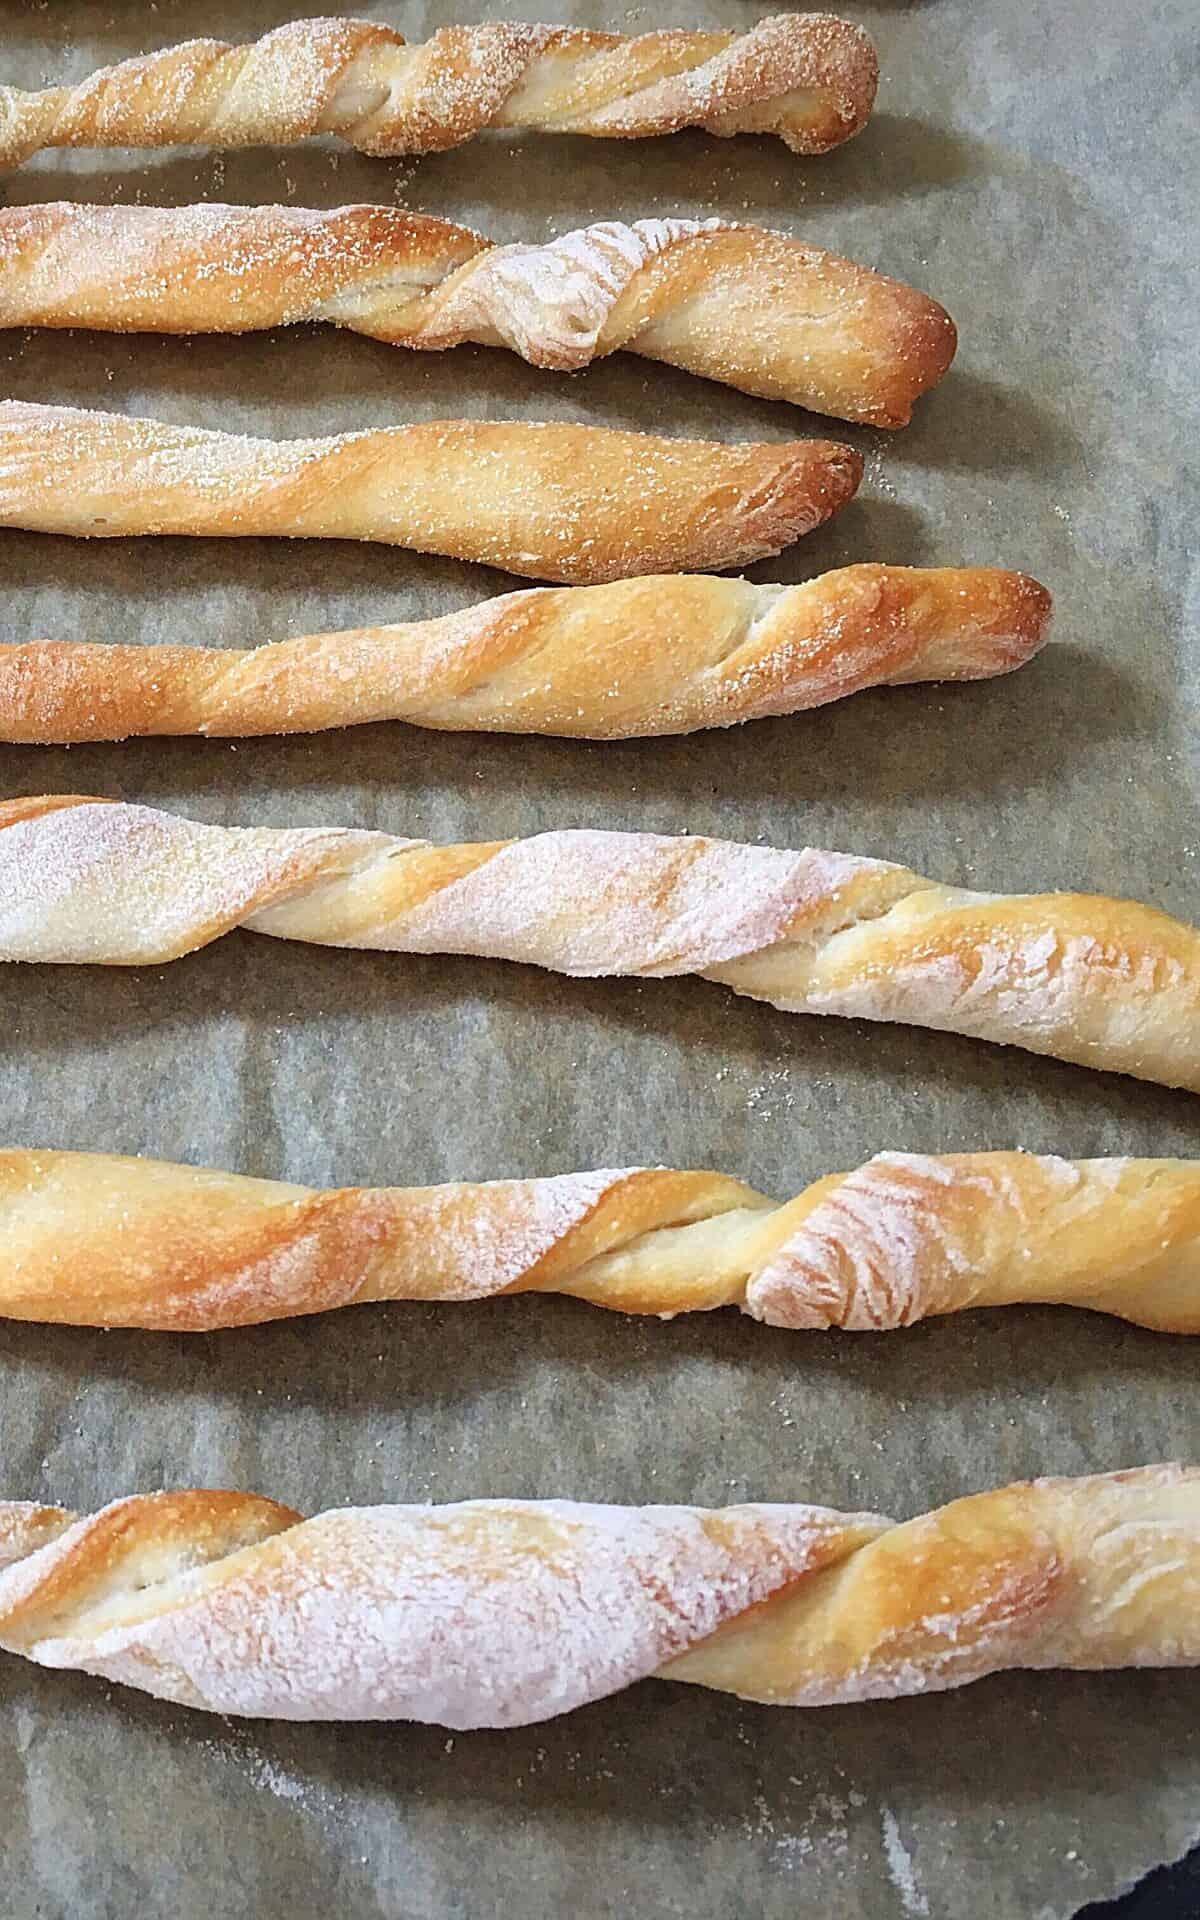  Don't be intimidated by sourdough - these breadsticks are easy to make!